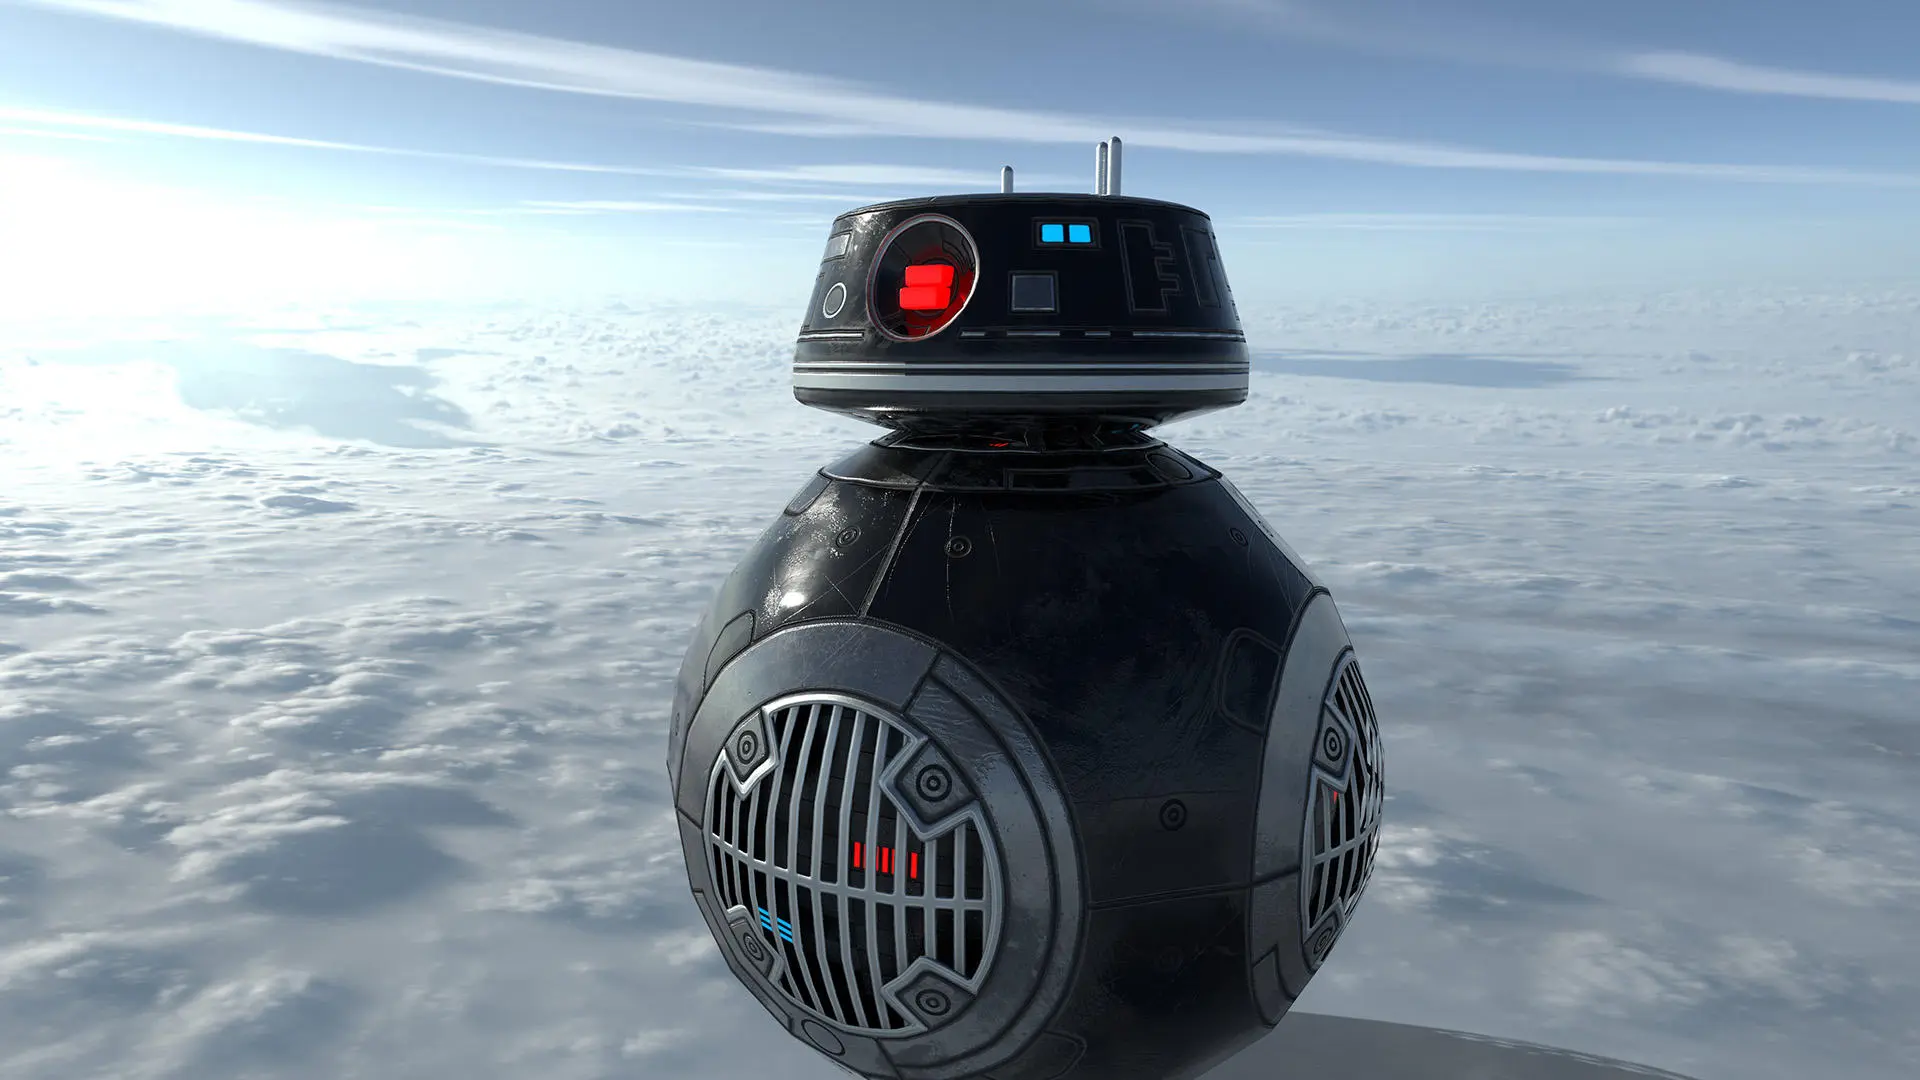 Picture shows droid designed by Harrison